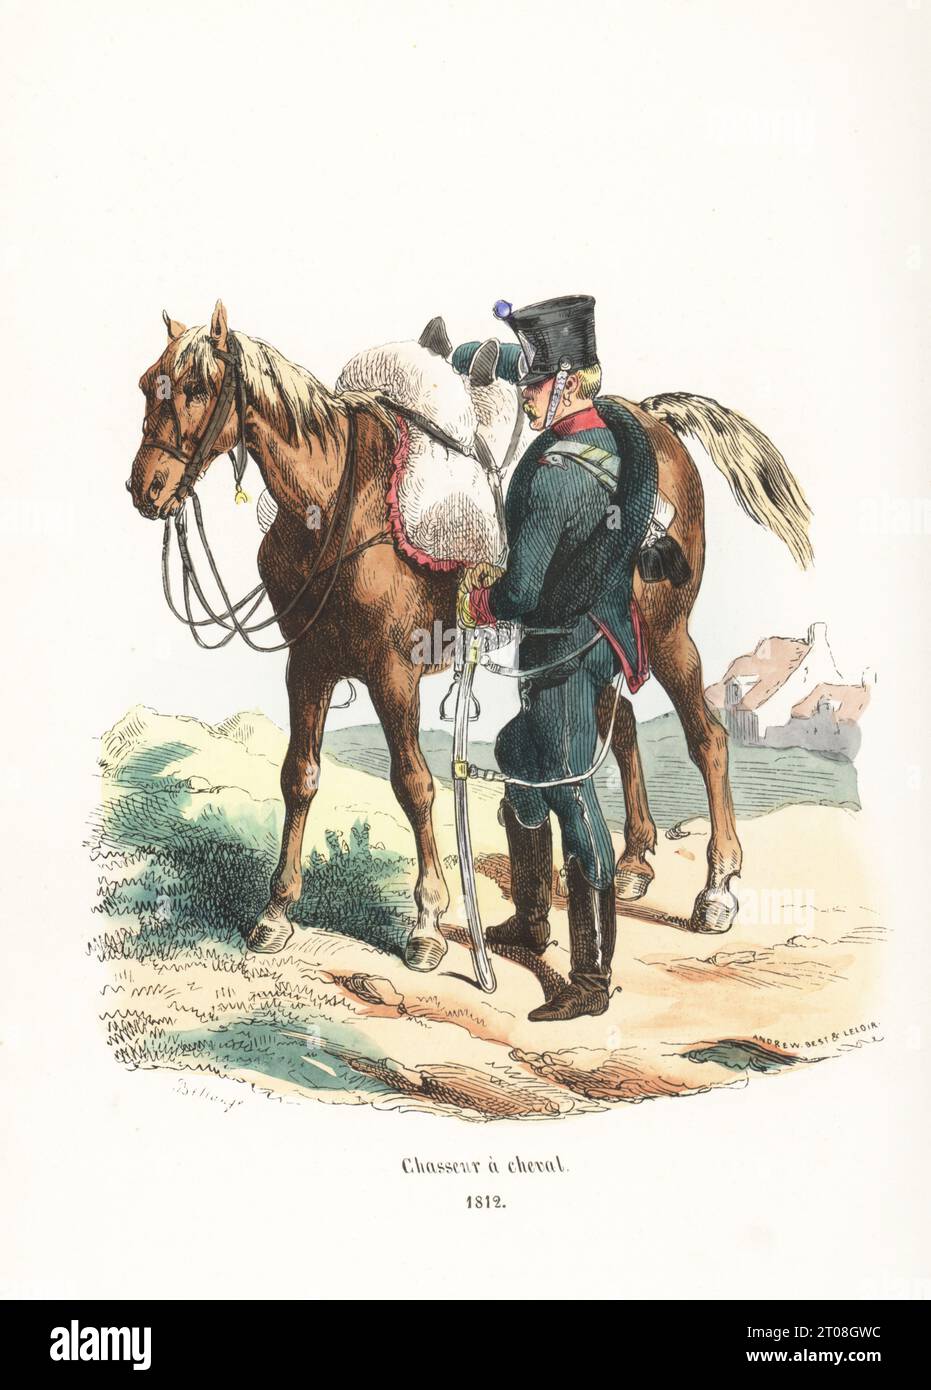 Uniform of the French Horse Chasseurs, 1st Regiment, 1812. In shako, green coat with red collar, cuffs and turnbacks, breeches and boots, armed with sabre. Mouton shabrack. Chasseur a cheval, 1812. Handcoloured woodcut by Andrew Best Leloir after an illustration by Hippolyte Bellangé from P.M. Laurent de l’Ardeche’s Histoire de Napoleon, Paris, 1840. Stock Photo